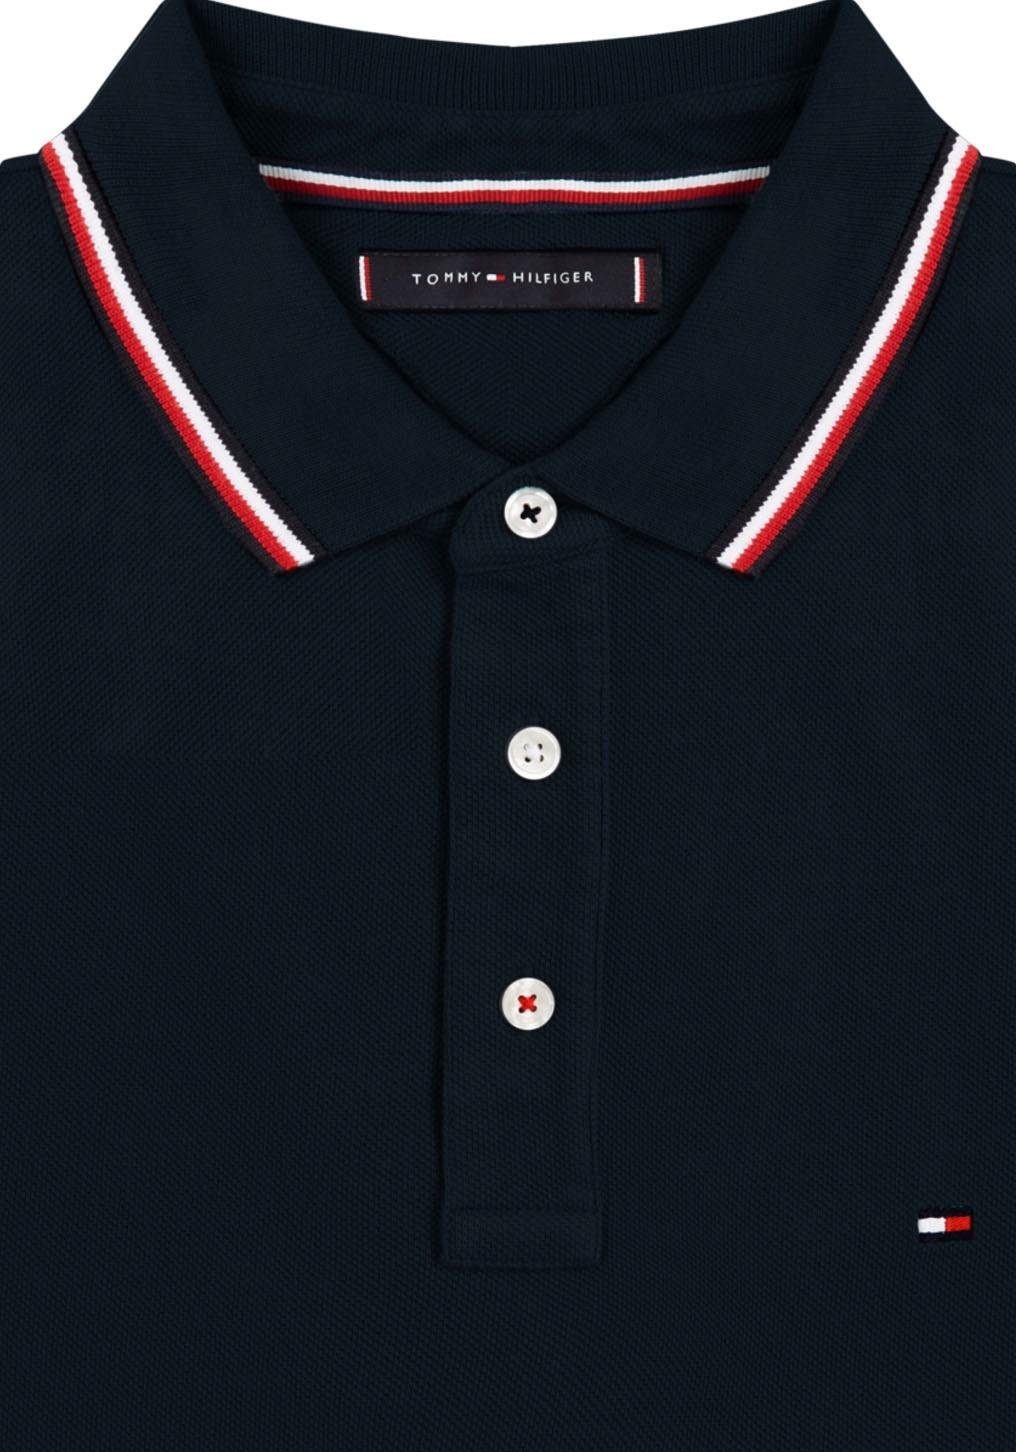 Tommy Hilfiger Poloshirt kaufen SLIM »TOMMY POLO« online TIPPED OTTO bei